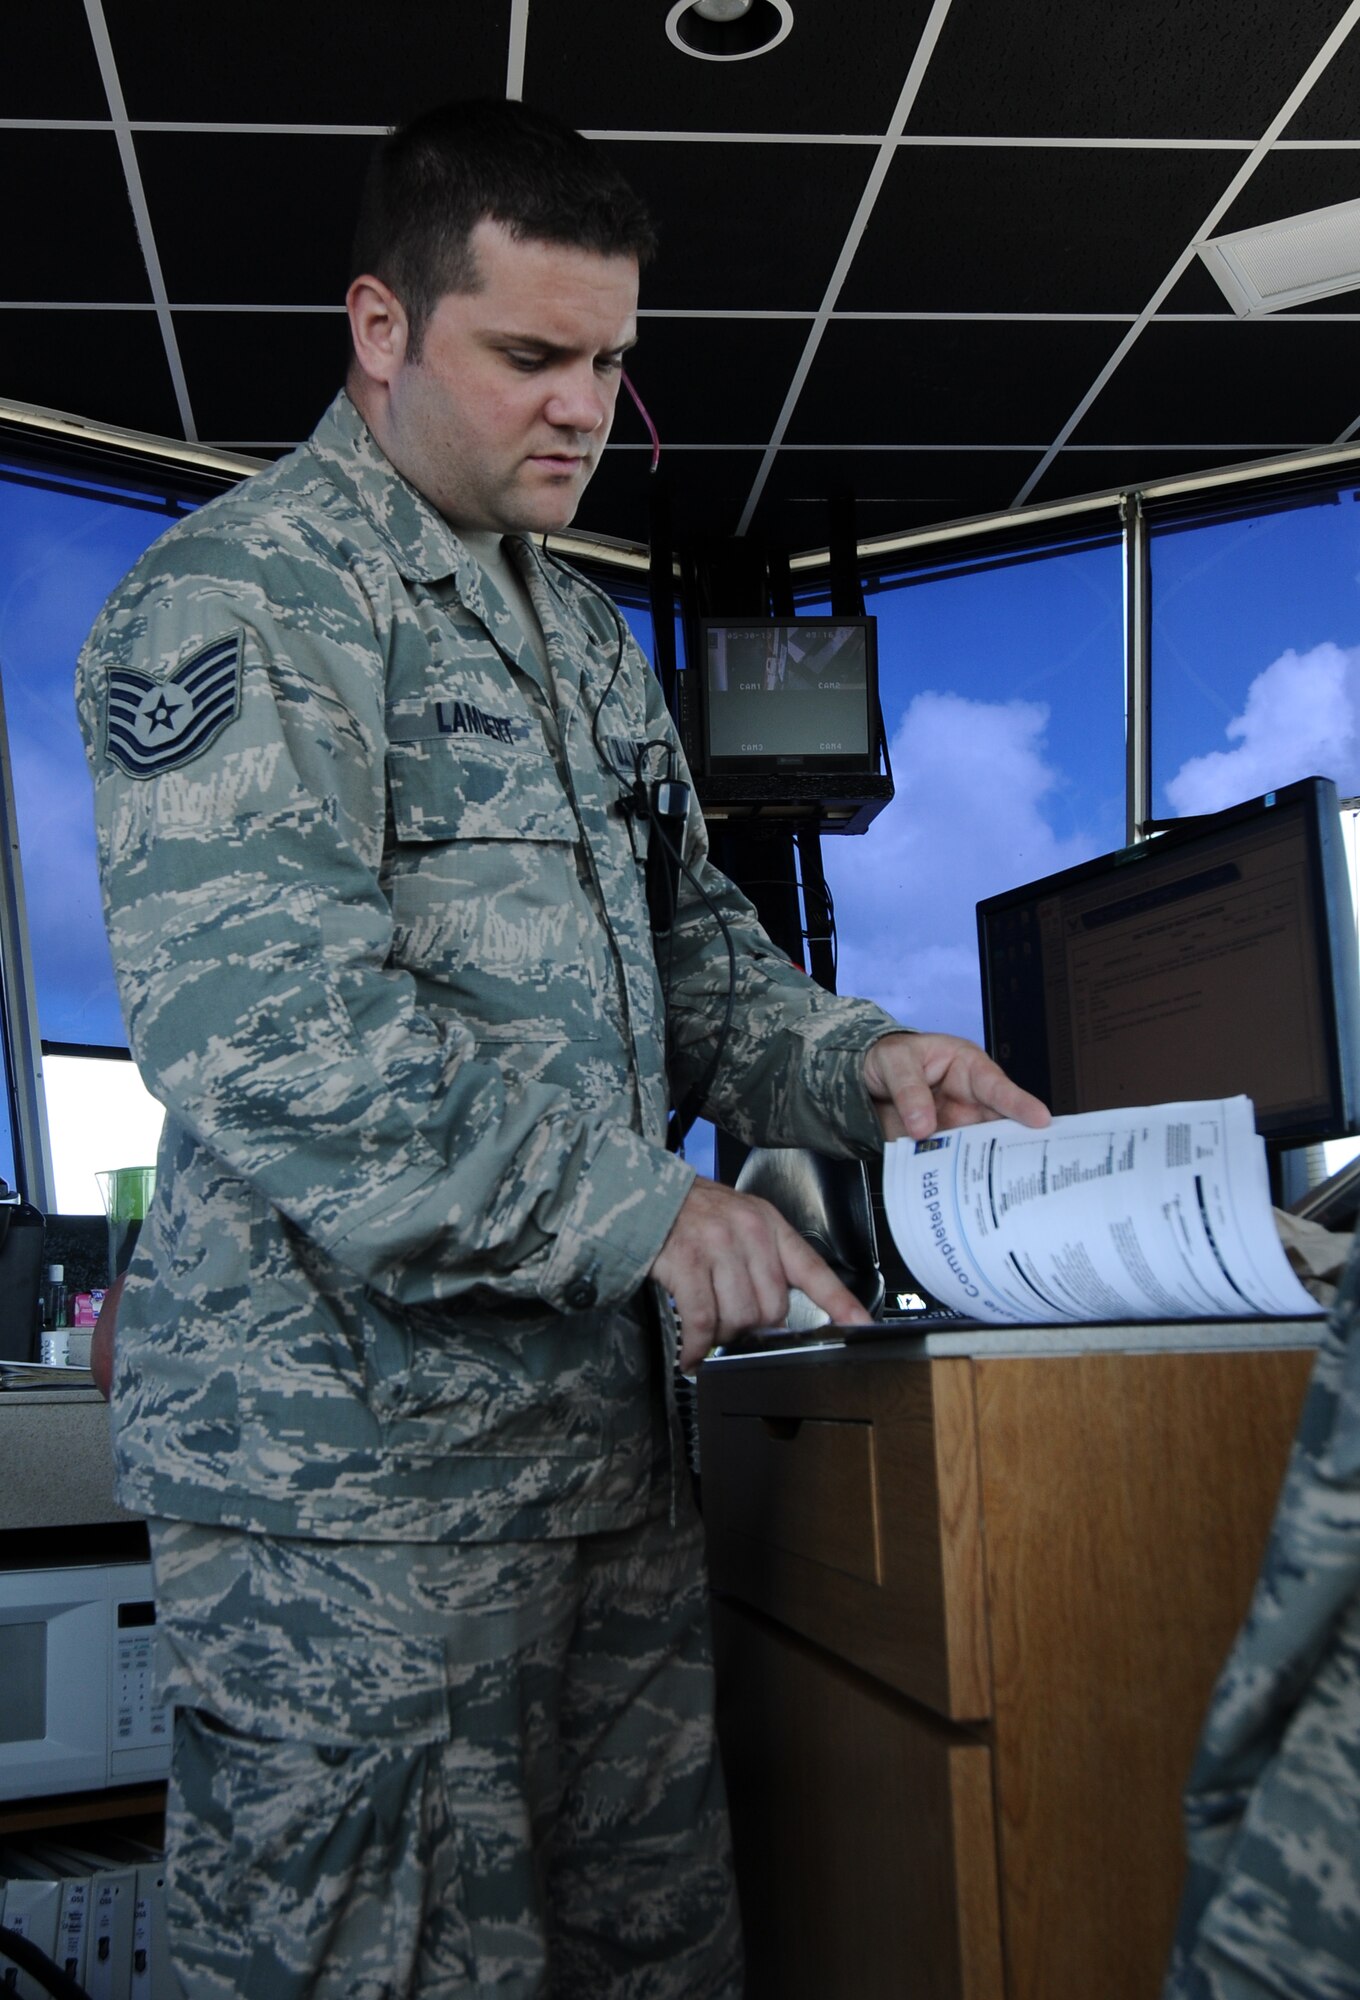 Tech. Sgt. Zachary Lambert, 36th Operations Support Squadron NCO in charge of air traffic control training, explains the flight plan for an aircraft May 30, 2013, on Andersen Air Force Base, Guam. The air traffic controllers use the flight plan to track the movements of aircraft from each checkpoint to remain aware of aircraft locations.
(U.S. Air Force photo by Airman 1st Class Emily Bradley/Released)
